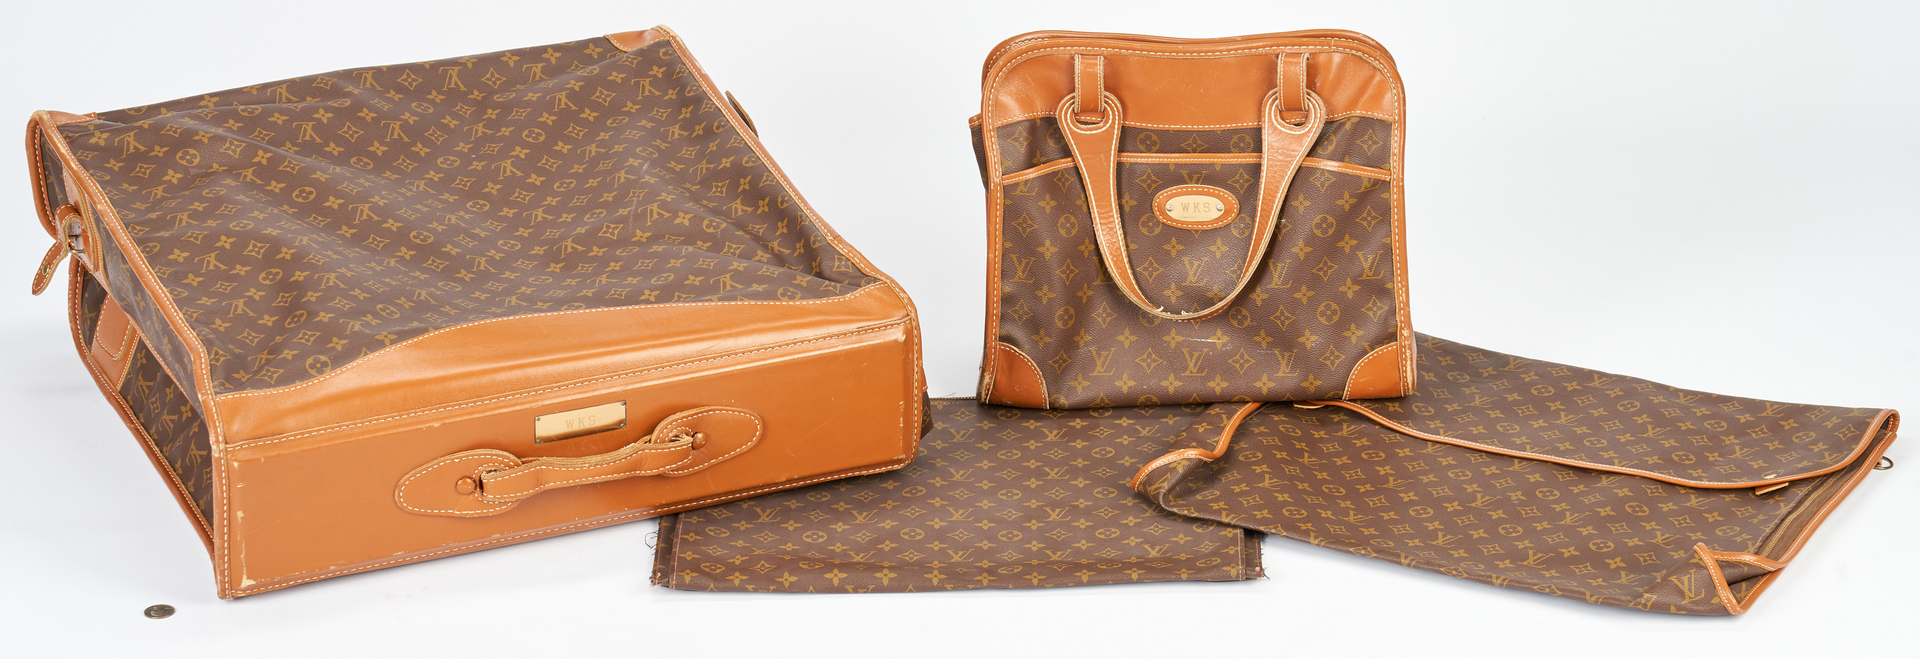 Lot 703: 4 Louis Vuitton Luggage Items